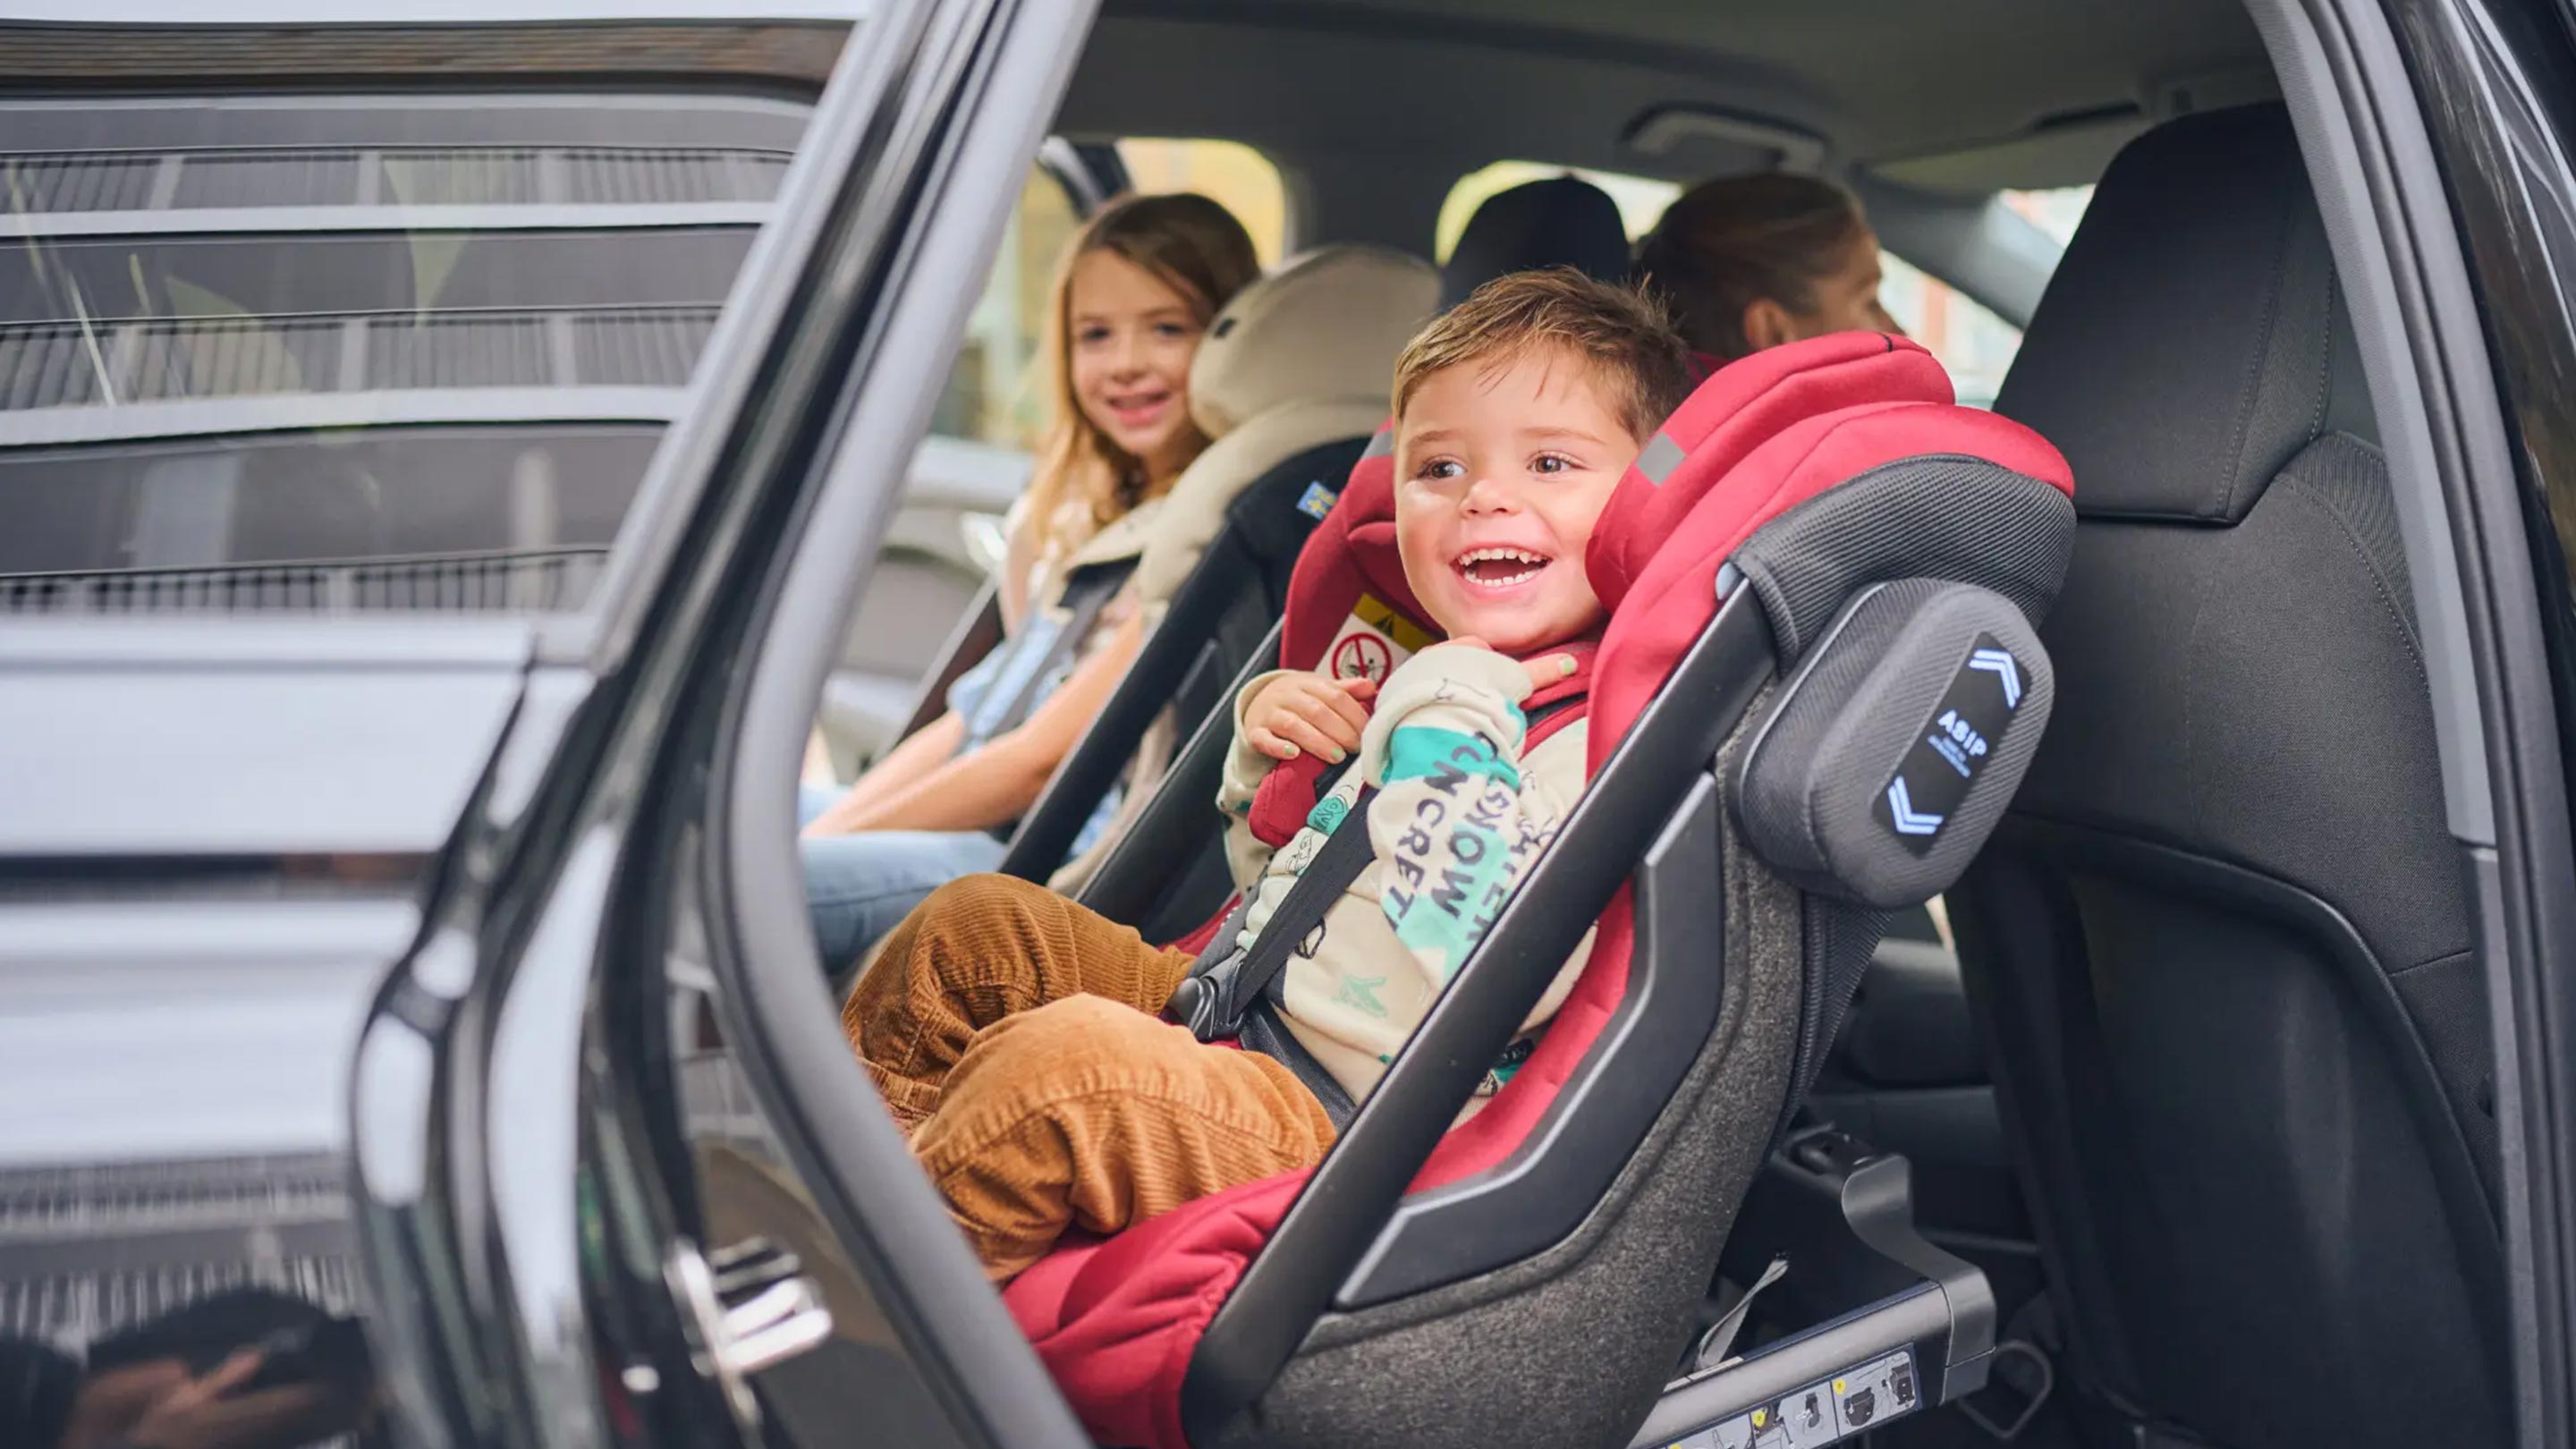 Axkid is the leading brand regarding child safety and car seats.